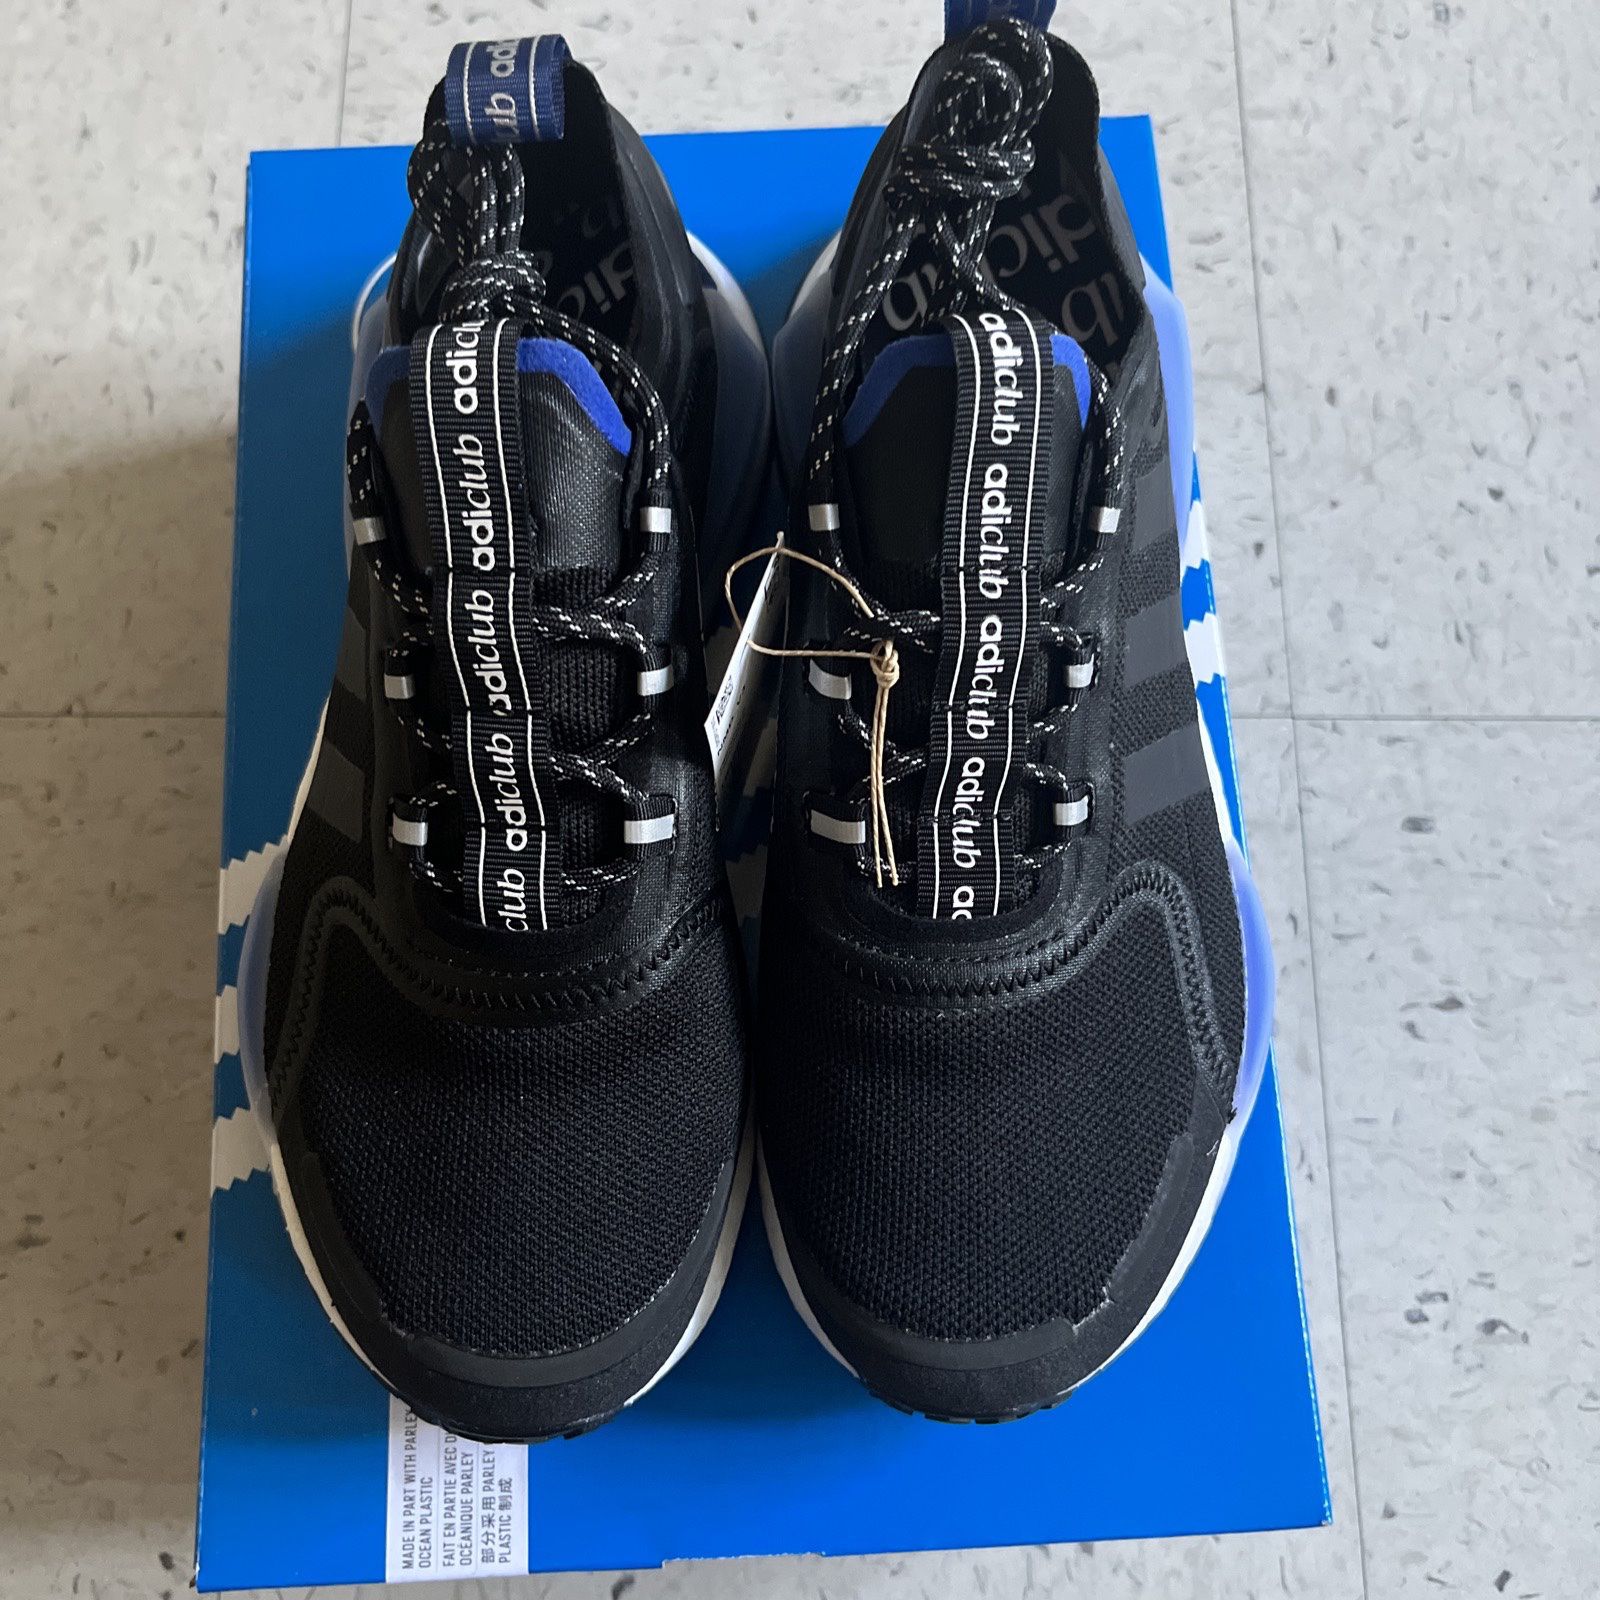 stressende Afsky Milliard Adidas NMD R1 V3 BOOST Royal Blue Core Black Core White Royal Blue US 6.5 ( UK 6) for Sale in The Bronx, NY - OfferUp